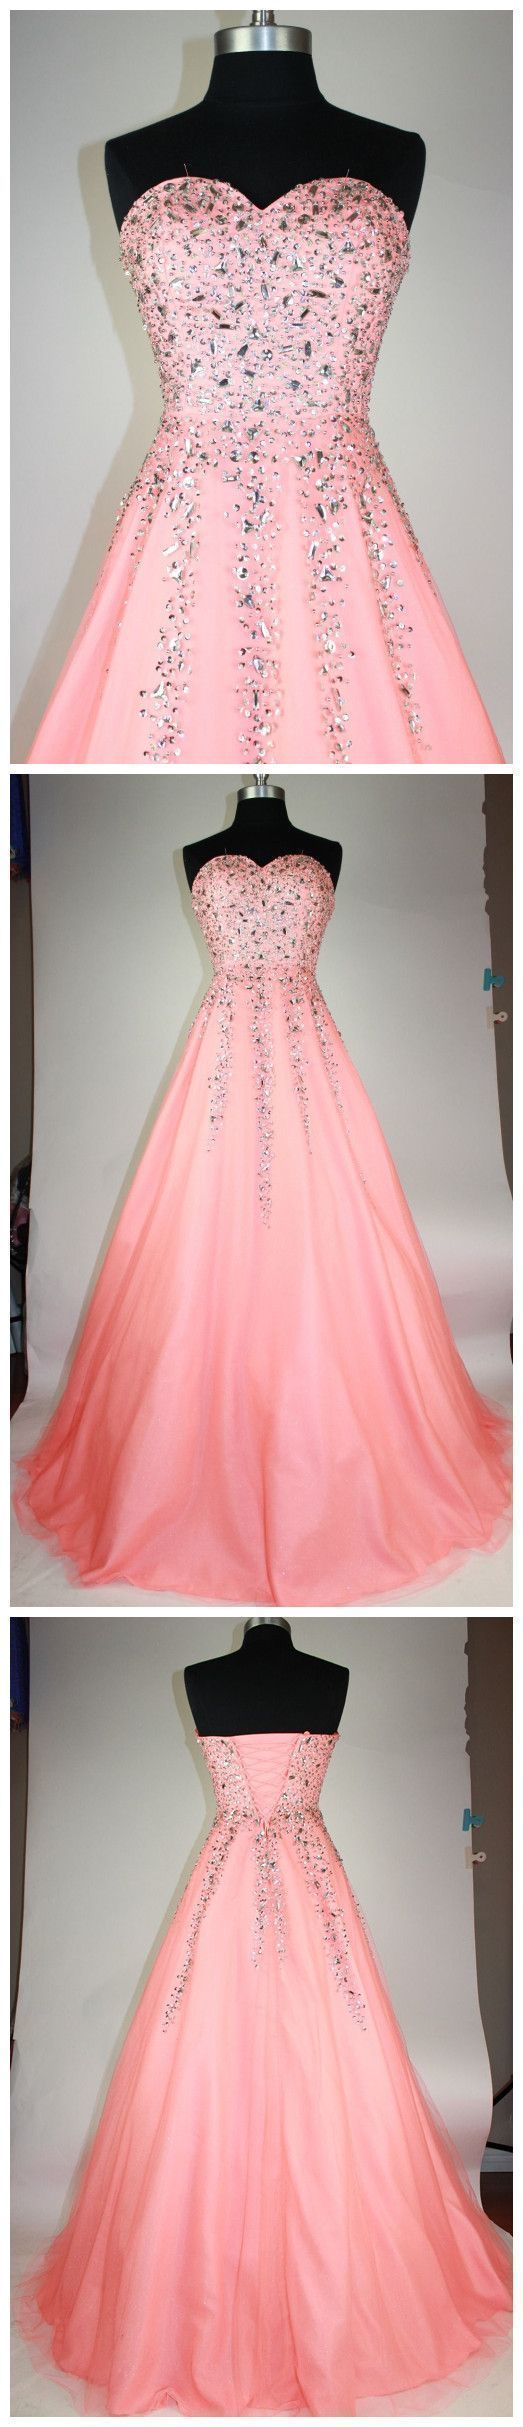 Shiny Beaded Crystal Long Prom Dress Custom Made Formal Evening Dress, Sexy A Line Pink Tulle Prom Party Gowns ,2019 Fashion Women Gowns